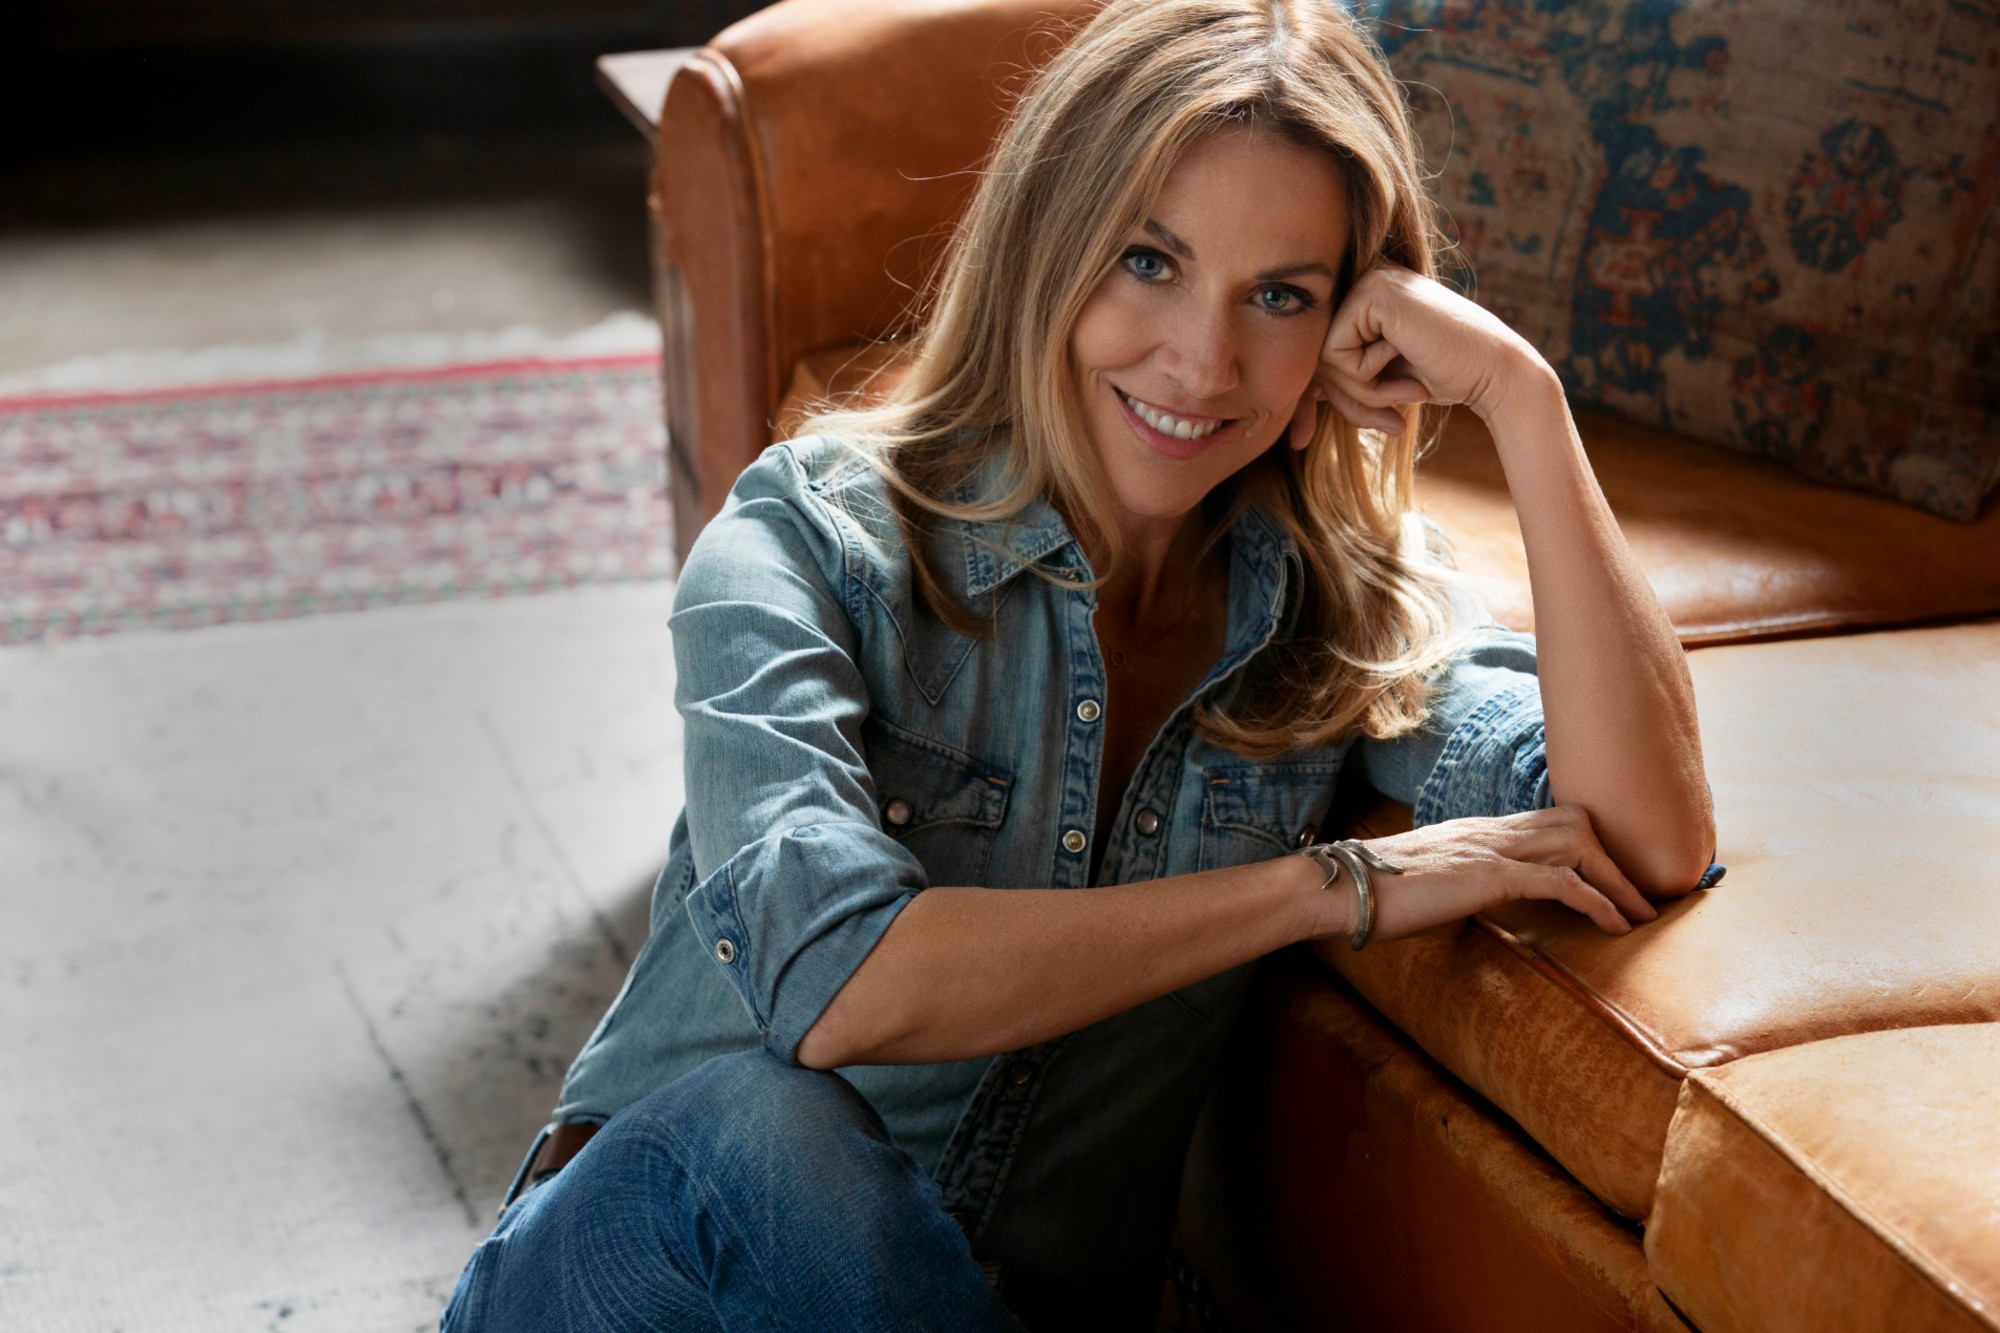 Sheryl Crow: “It’s shocking that after 231 years we’ve never had a woman President”